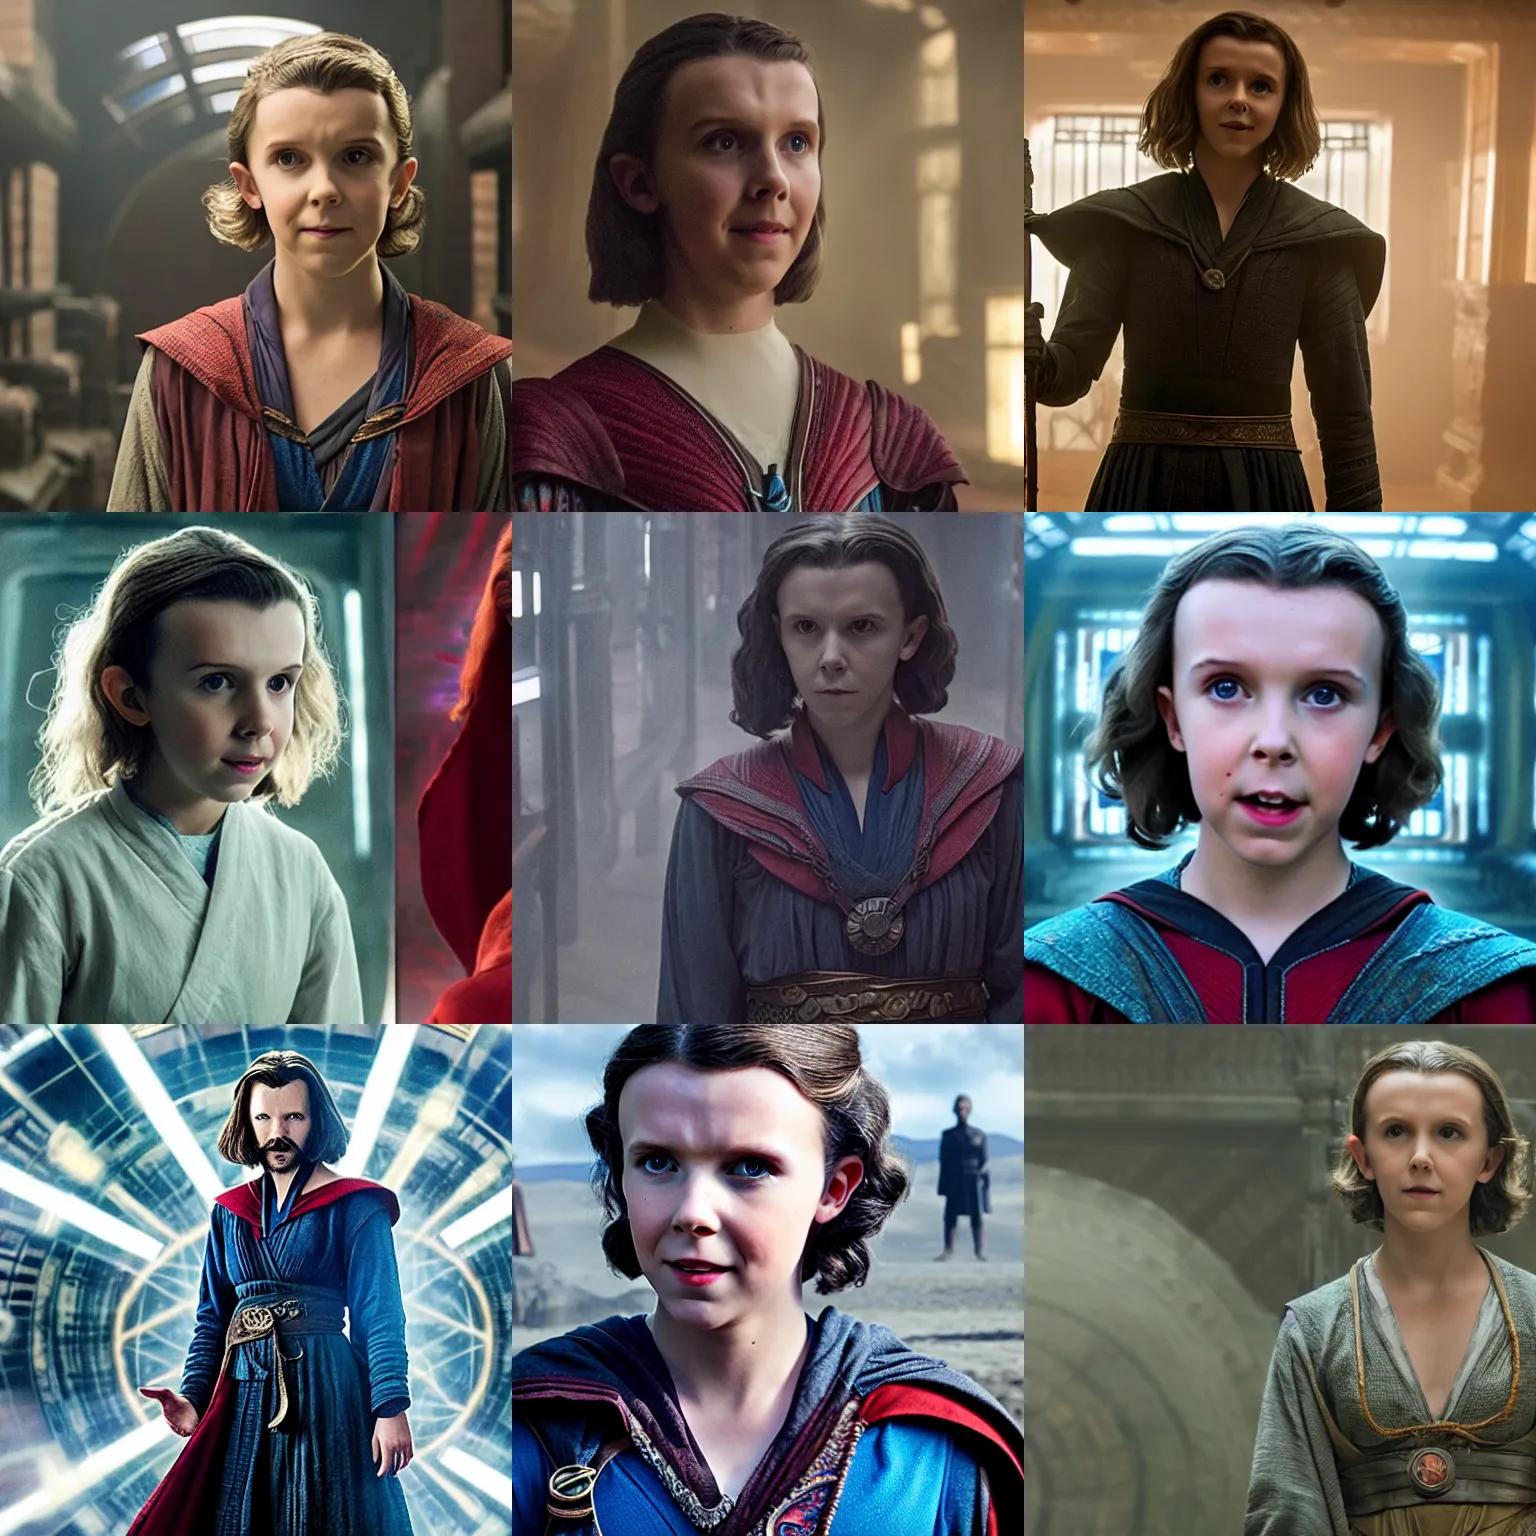 Prompt: Eleven/Millie Bobbie Brown as the Ancient One, long hair, smiling, film still from 'Doctor Strange'